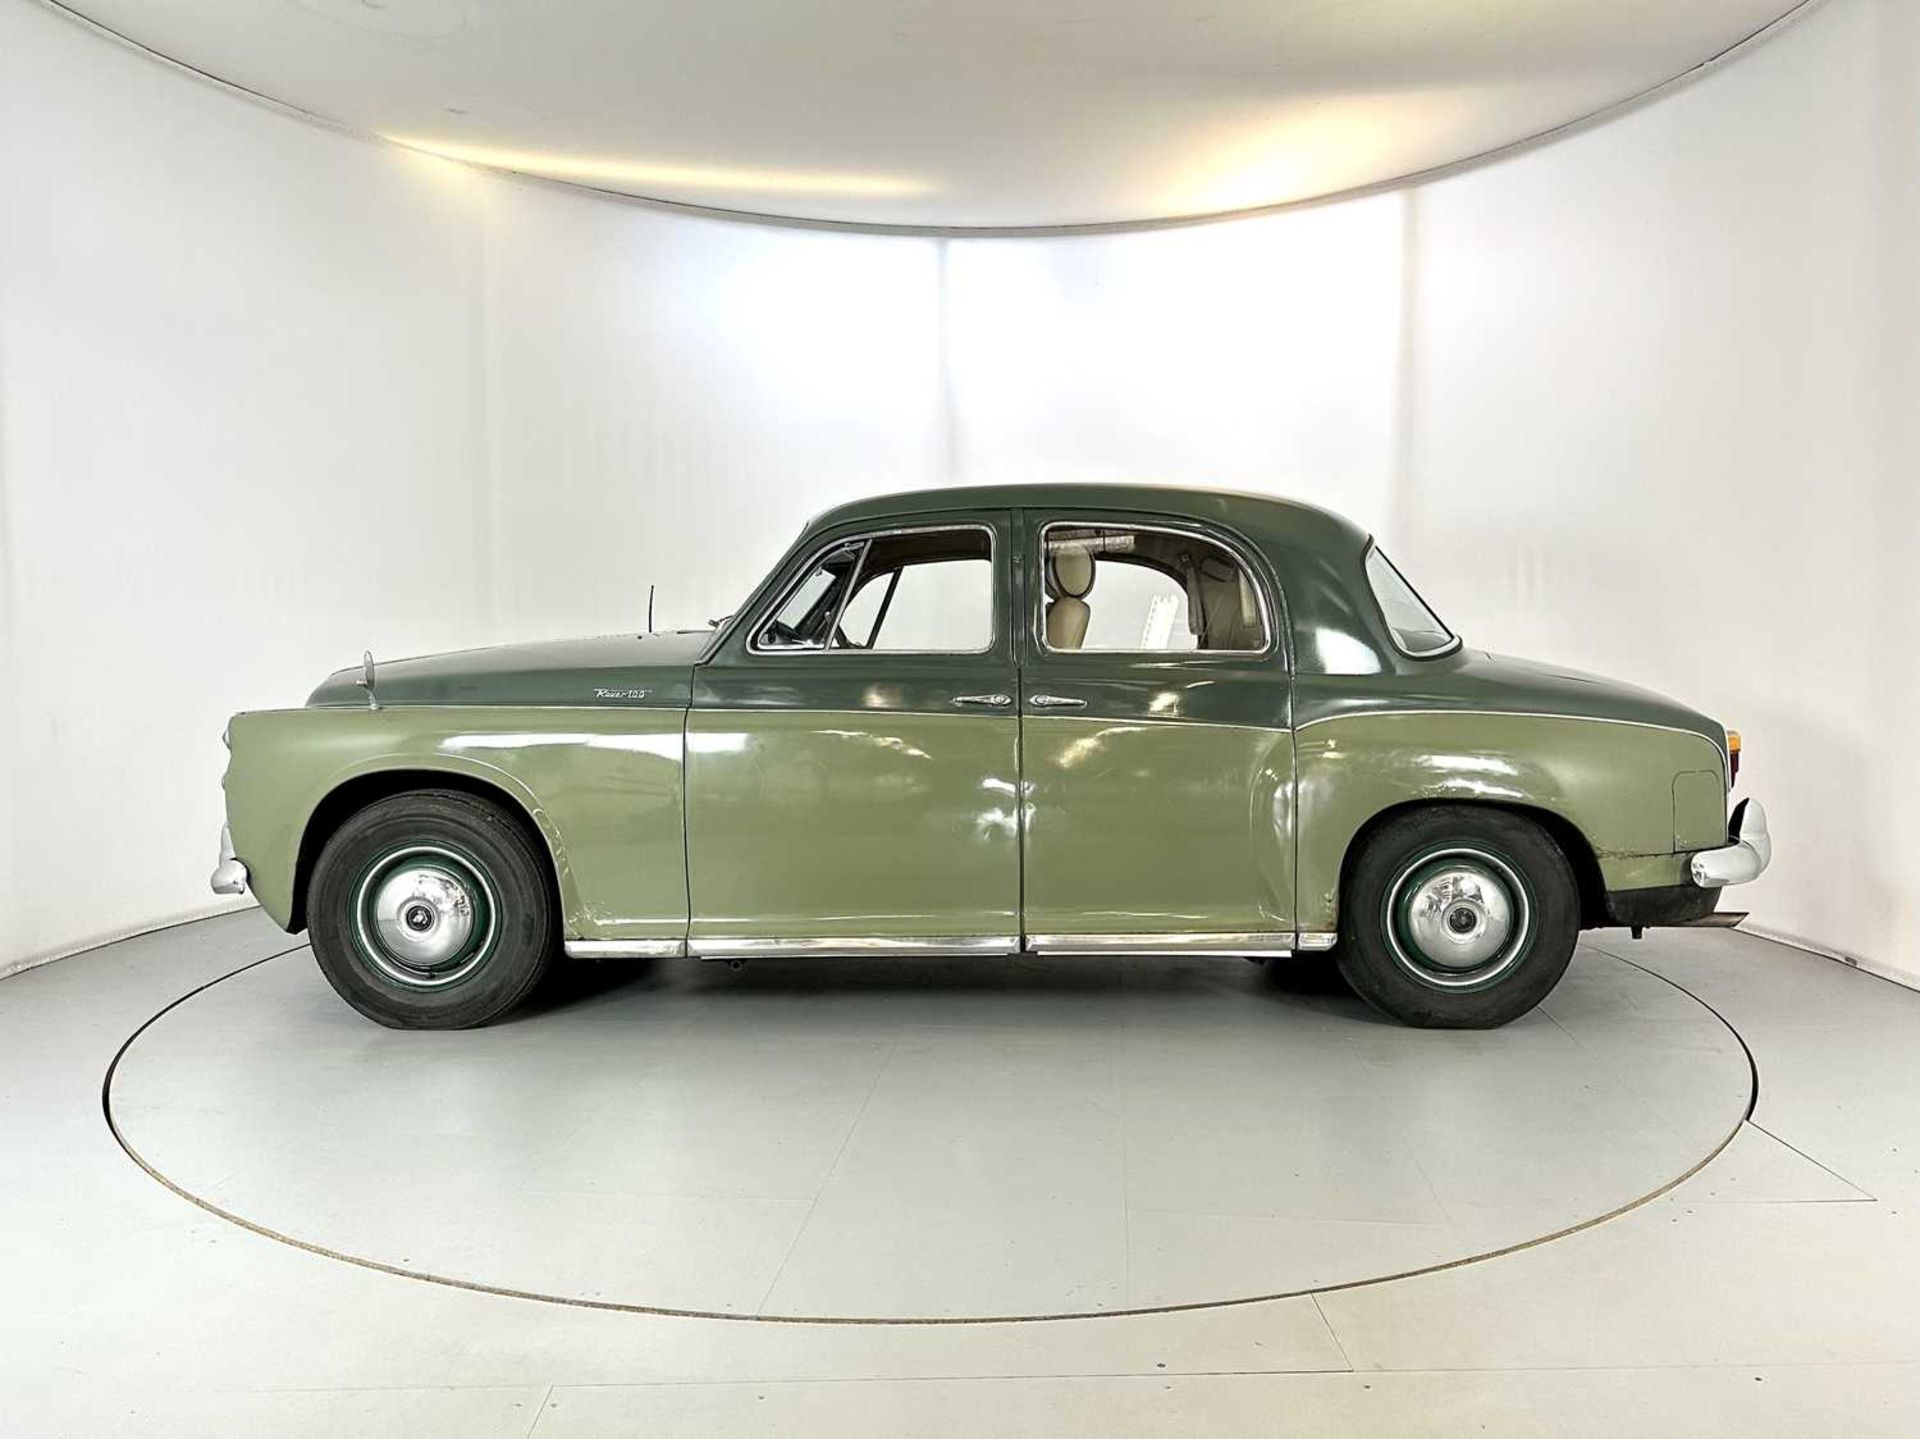 1959 Rover P4 100 - Image 5 of 31